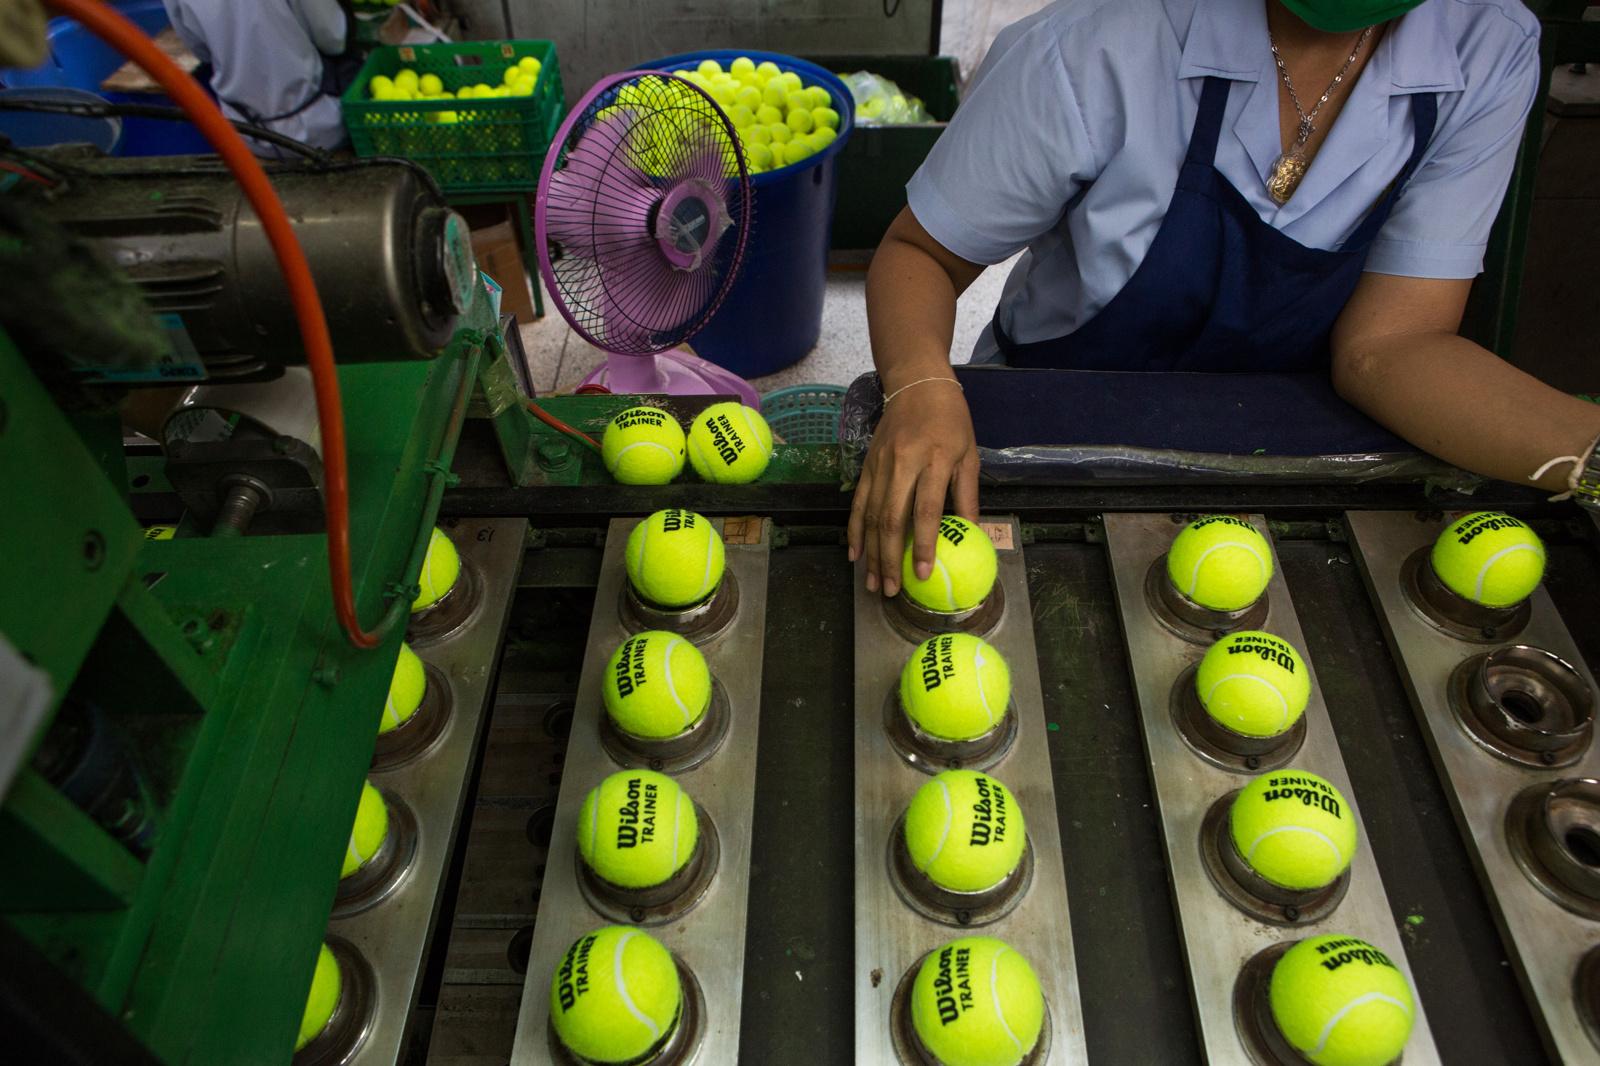 Wilson Tennis Ball Factory - For The New York Times - Nakhon Pathom, Thailand Ð August 18, 2016 : Finished...